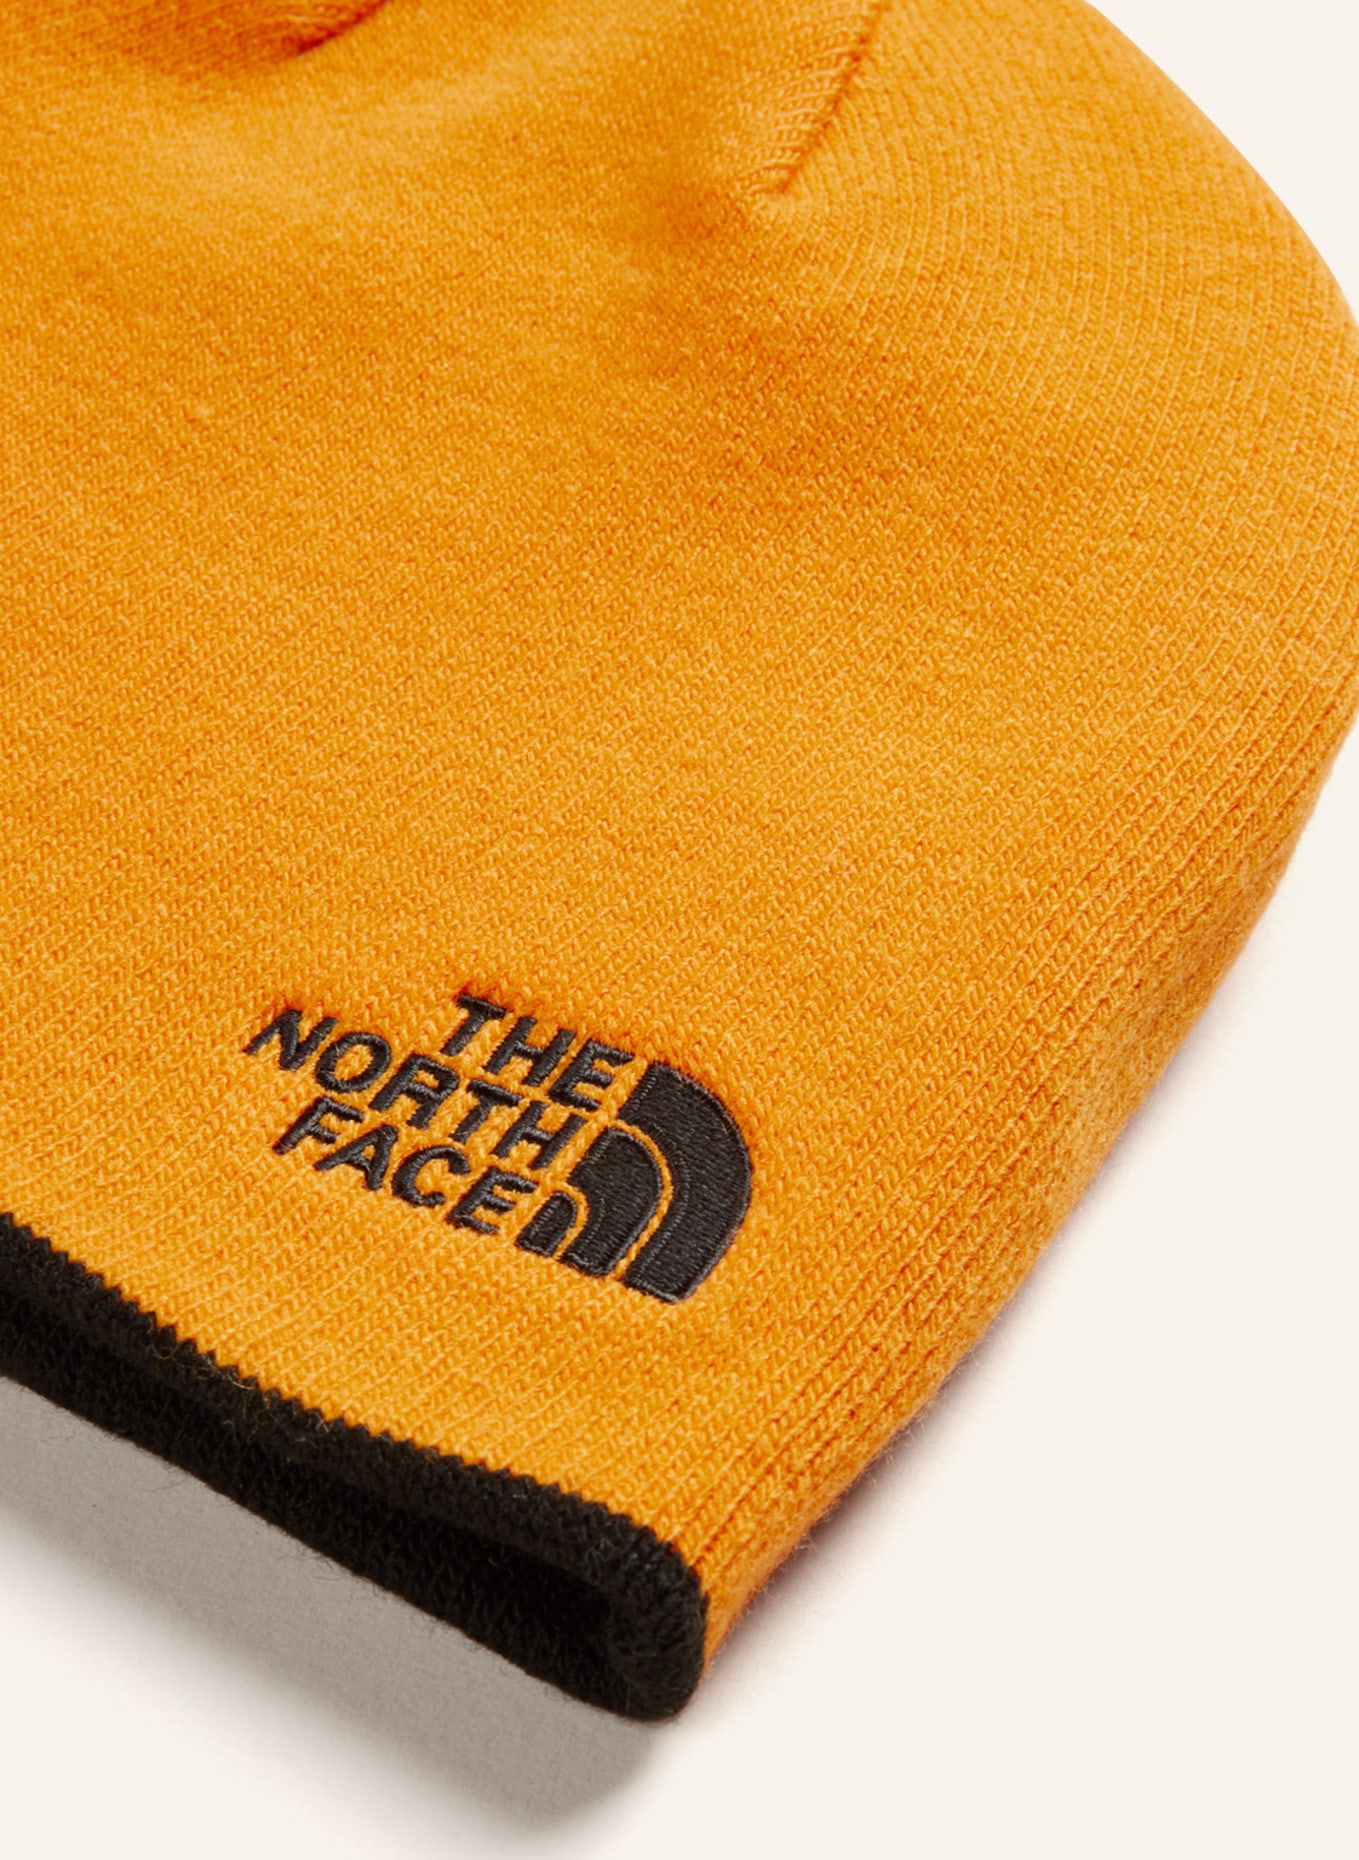 THE NORTH FACE Beanie TNF BANNER reversible, Color: BLACK/ DARK YELLOW (Image 4)